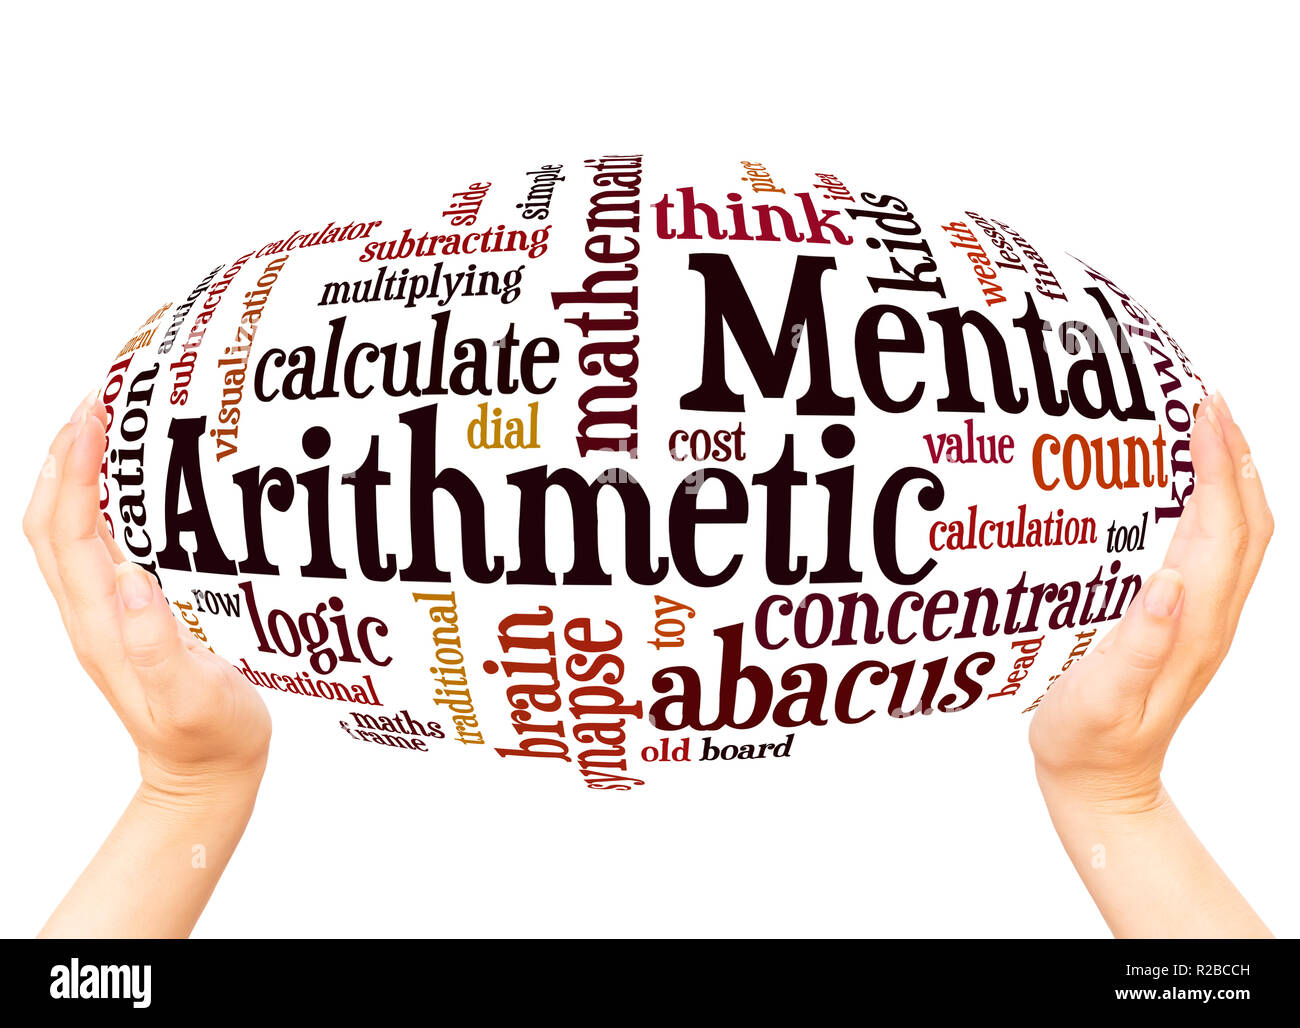 Mental Arithmetic word cloud hand sphere concept on white background. Stock Photo